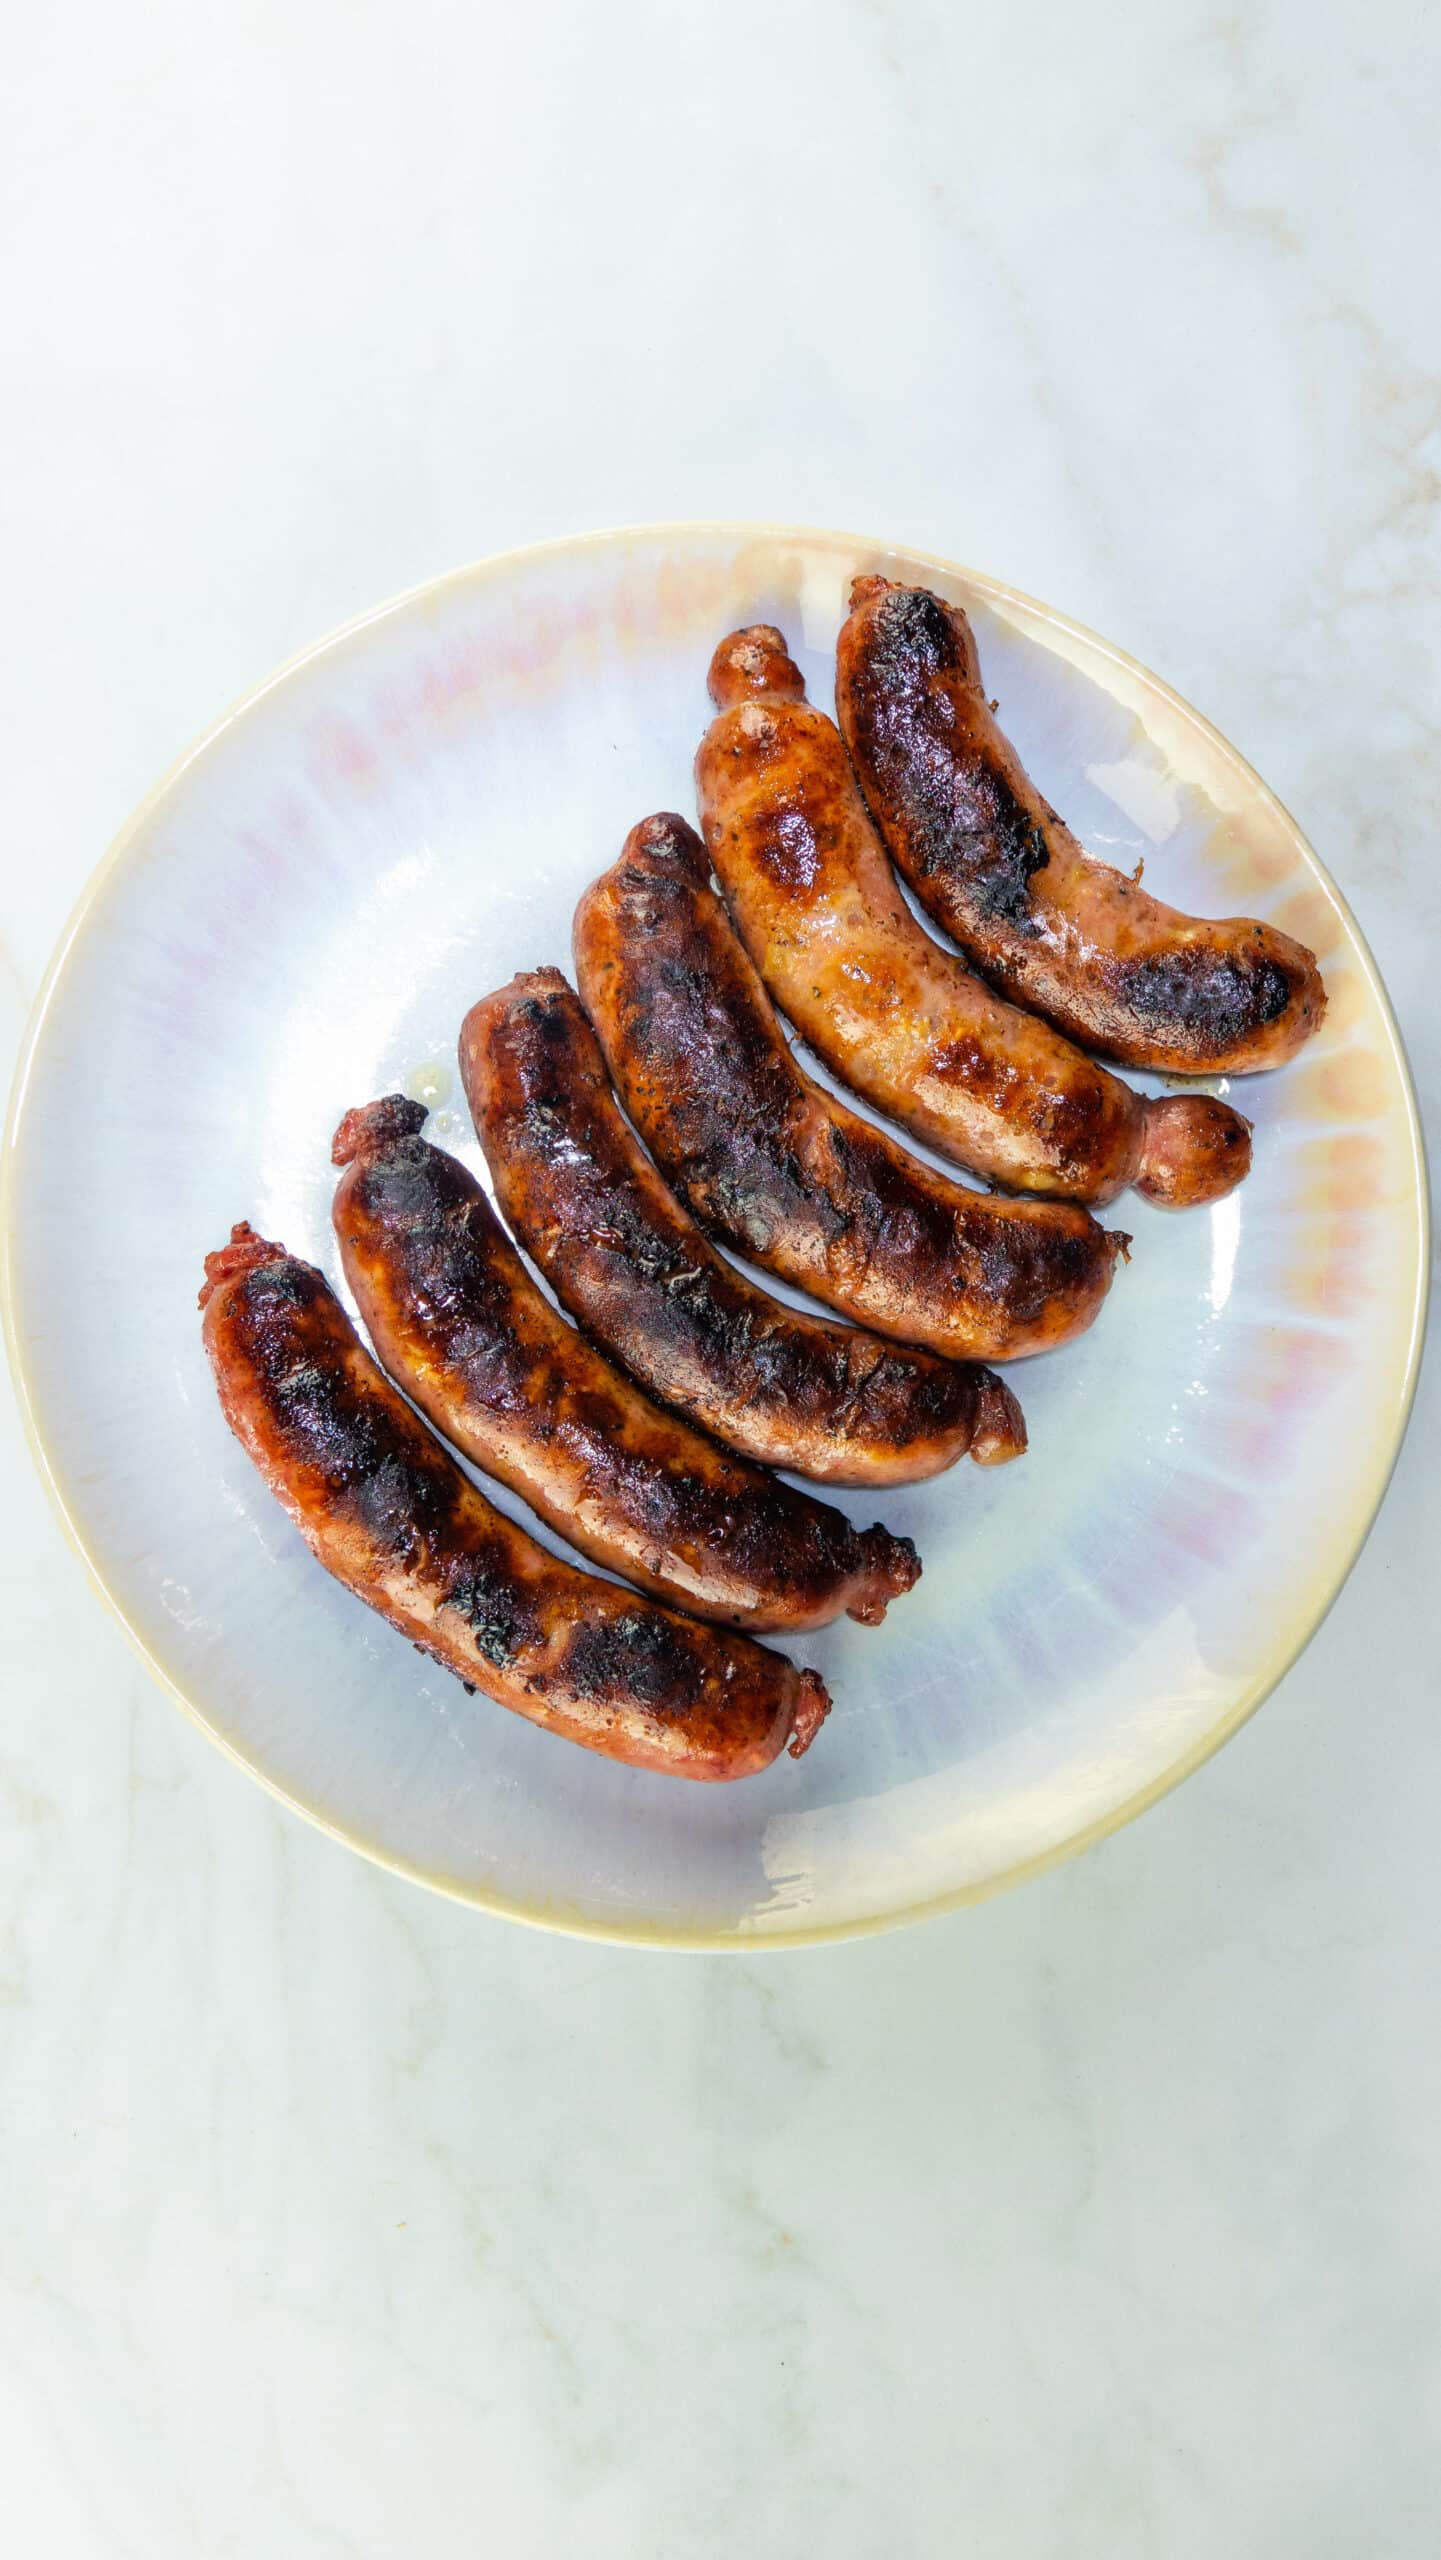 Plate of reheat sausages 